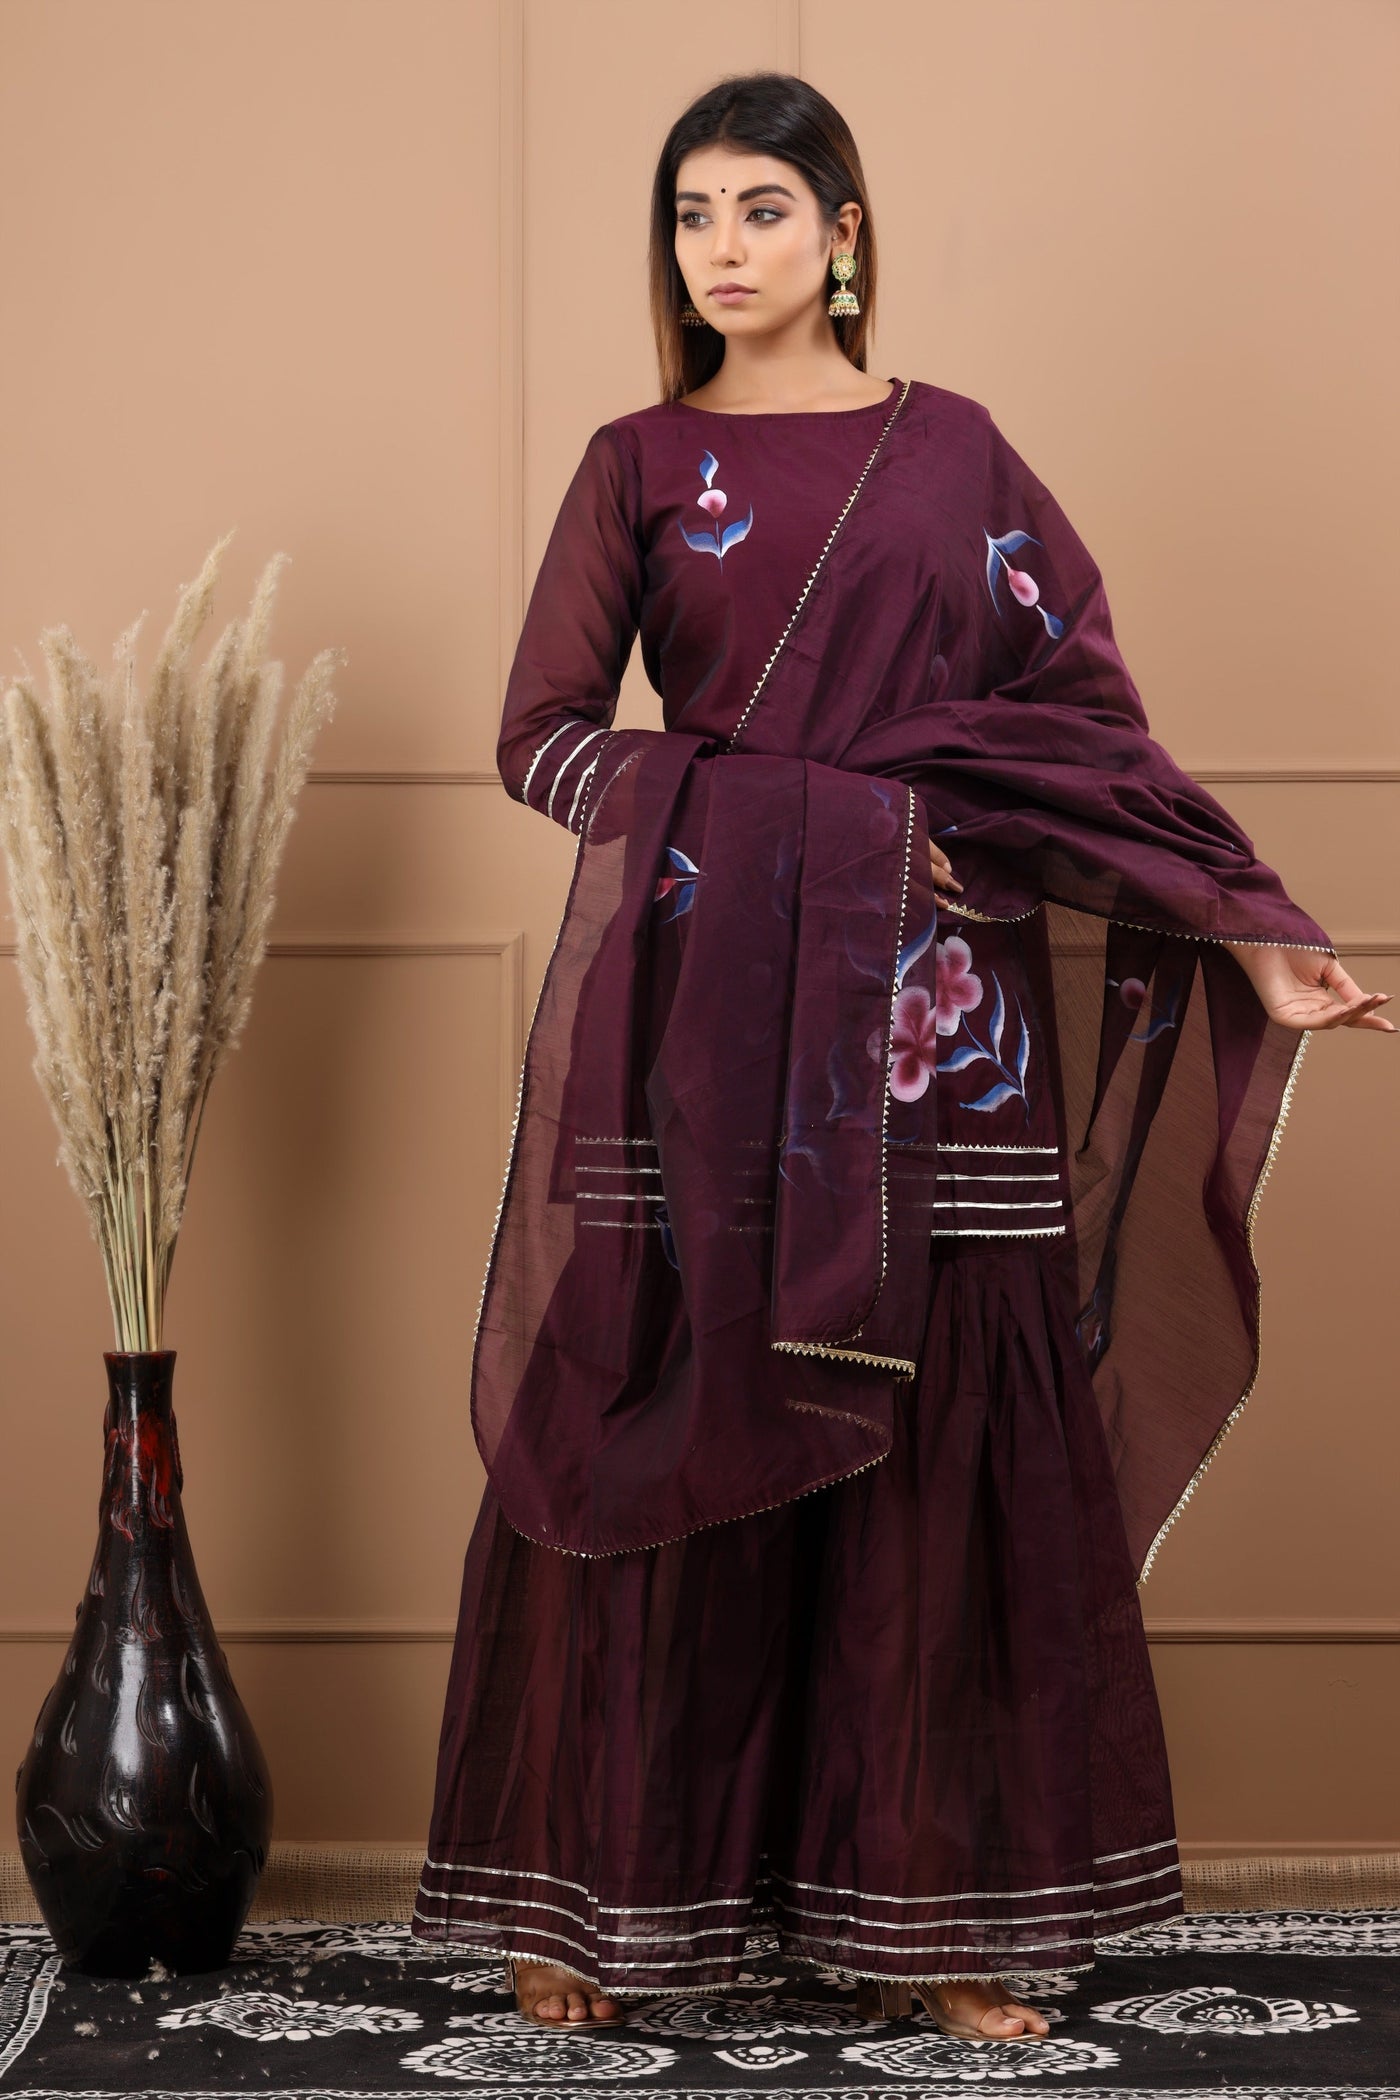 Women's Purple Hand Painted Kurta with Sharara and Dupatta by Saras The Label ( 3 Pc Set )